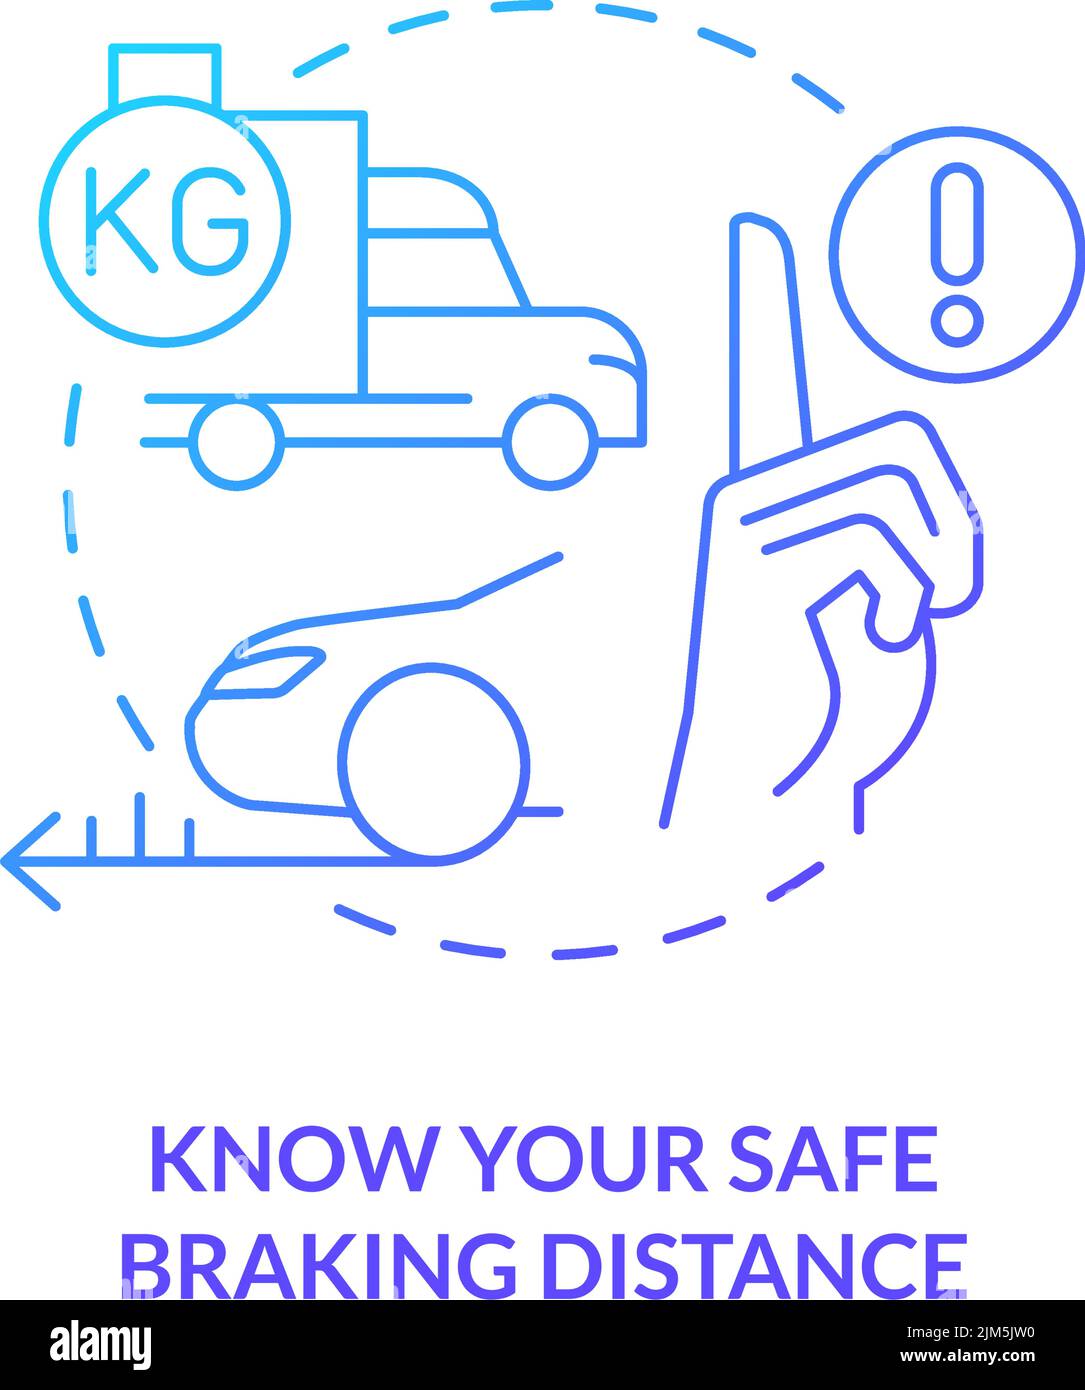 Know your safe braking distance blue gradient concept icon Stock Vector